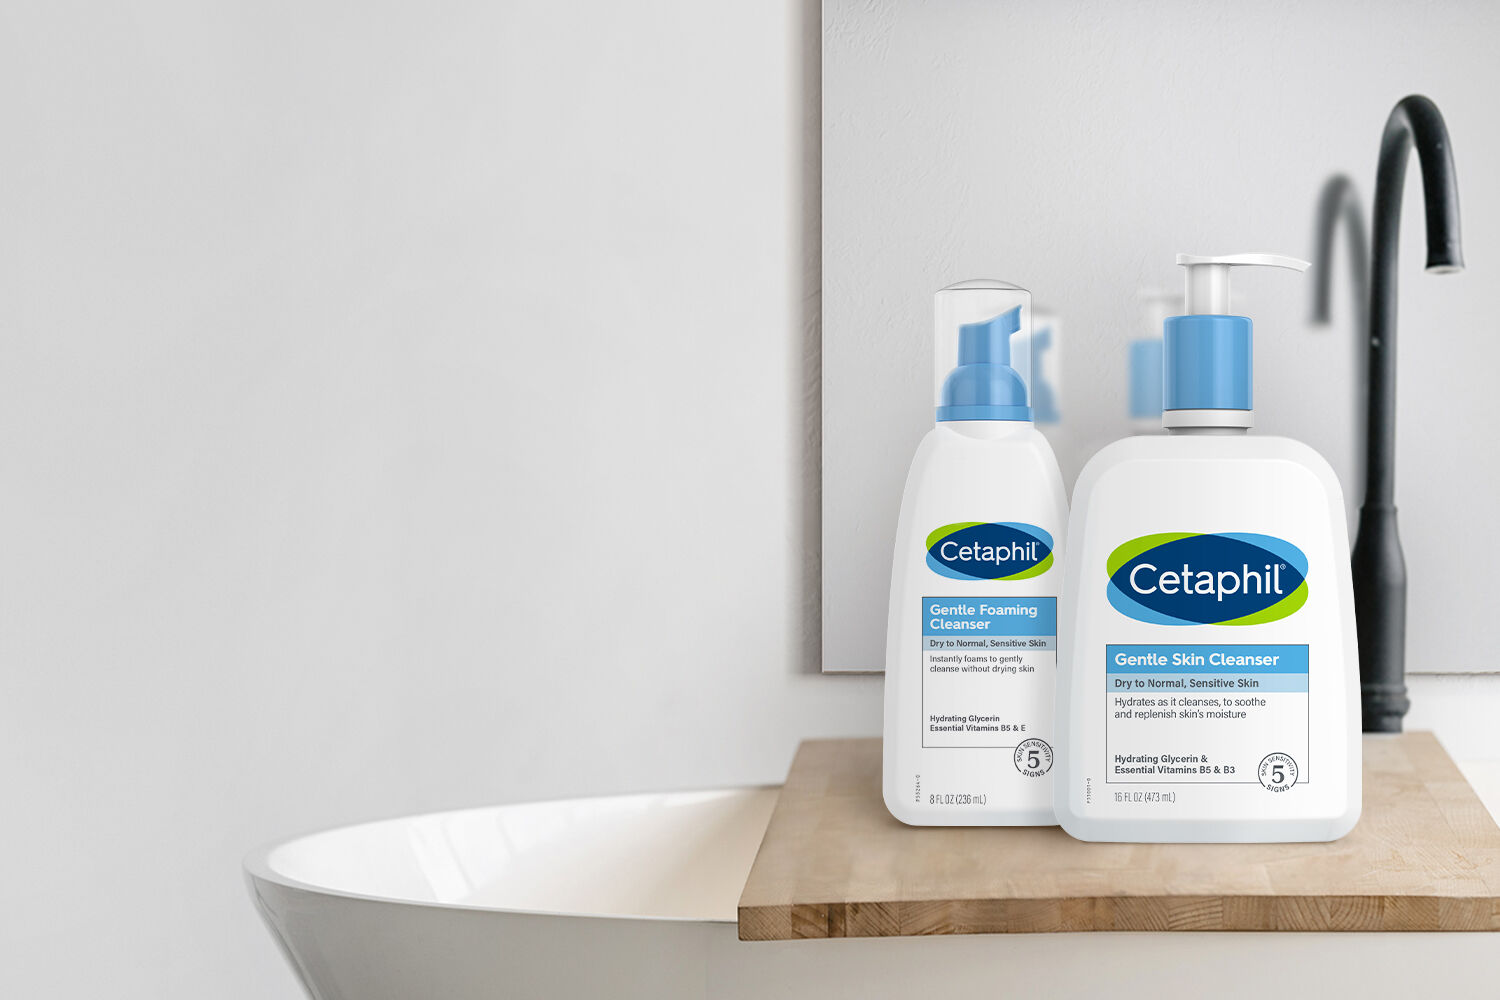 How Cetaphil Helps Sensitive Skin and What It Means for Pakistani Skin